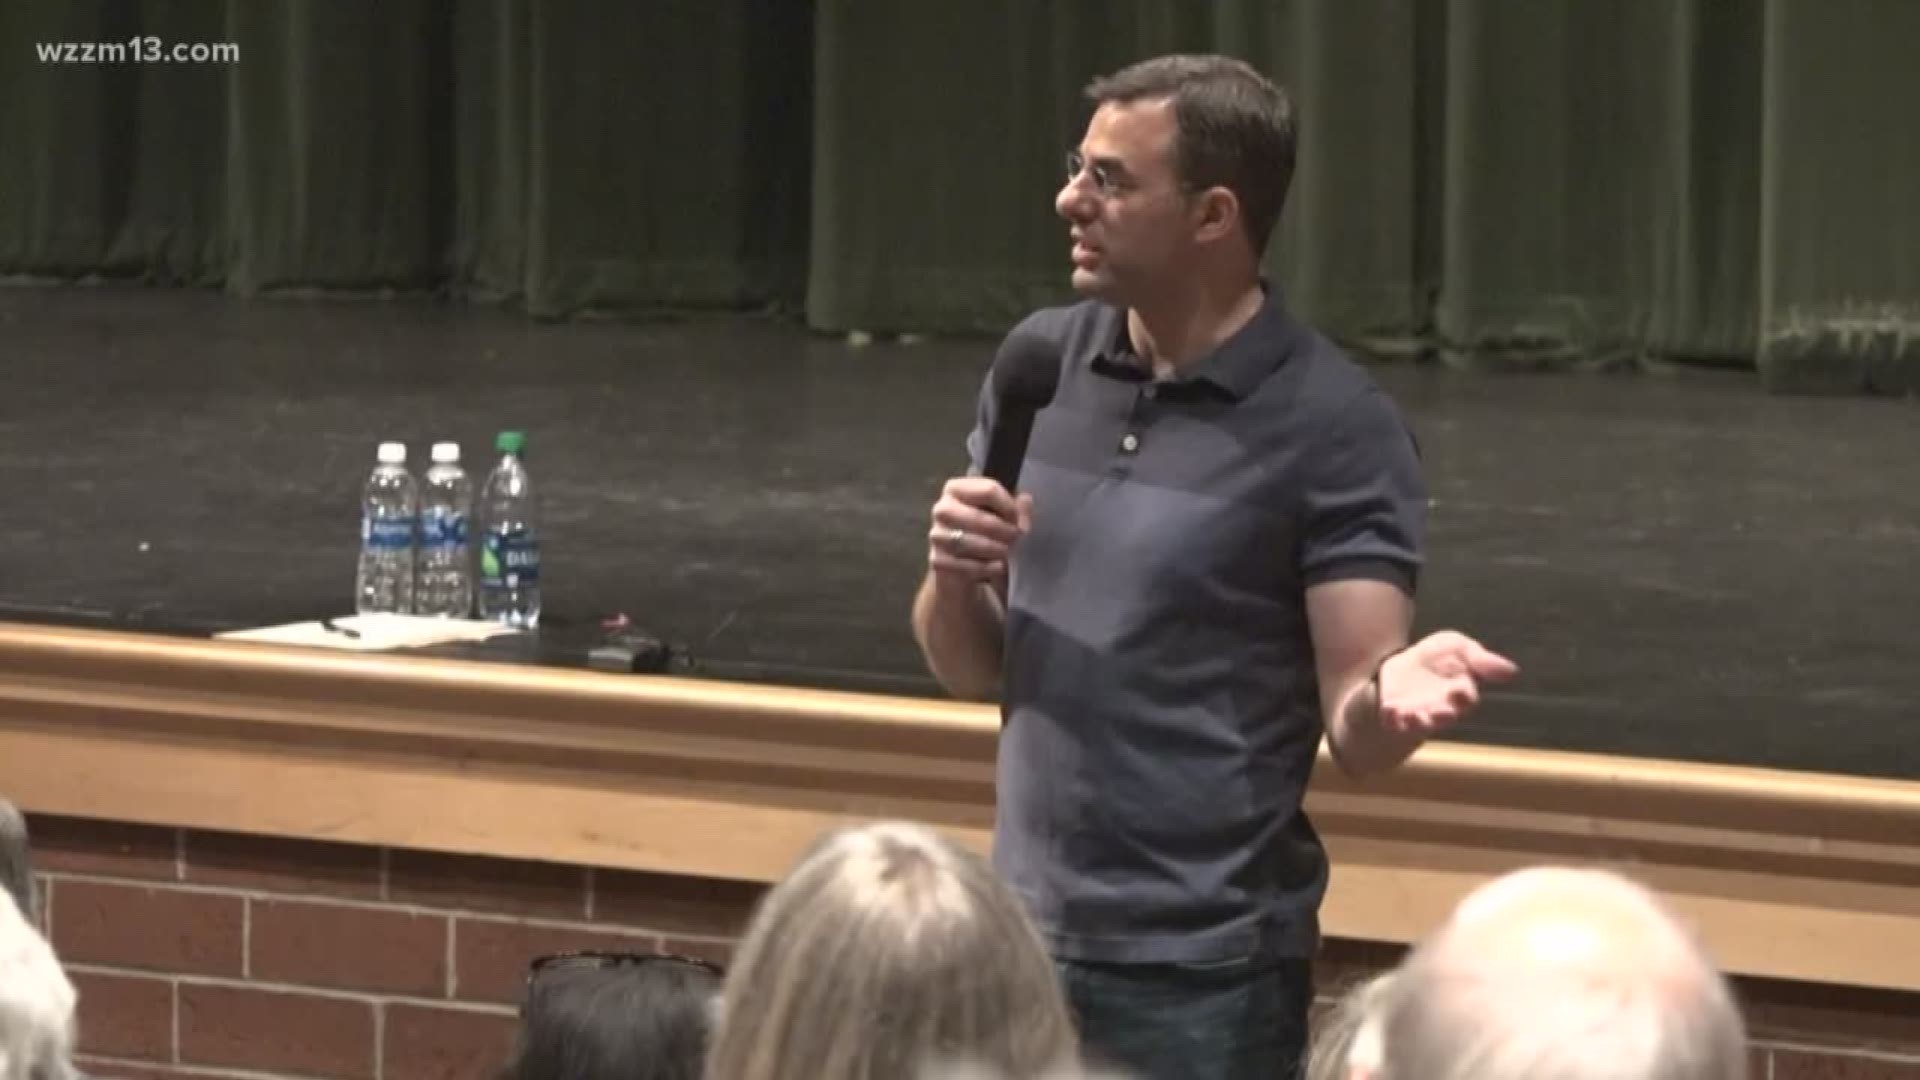 Republican U.S. Rep. Justin Amash will be hosting a town hall meeting in Grand Rapids today. The meeting will take place from 5:30 to 6:30 p.m. on Tuesday, May 28, at Grand Rapids Christian High School in the DeVos Center for Arts and Worship.